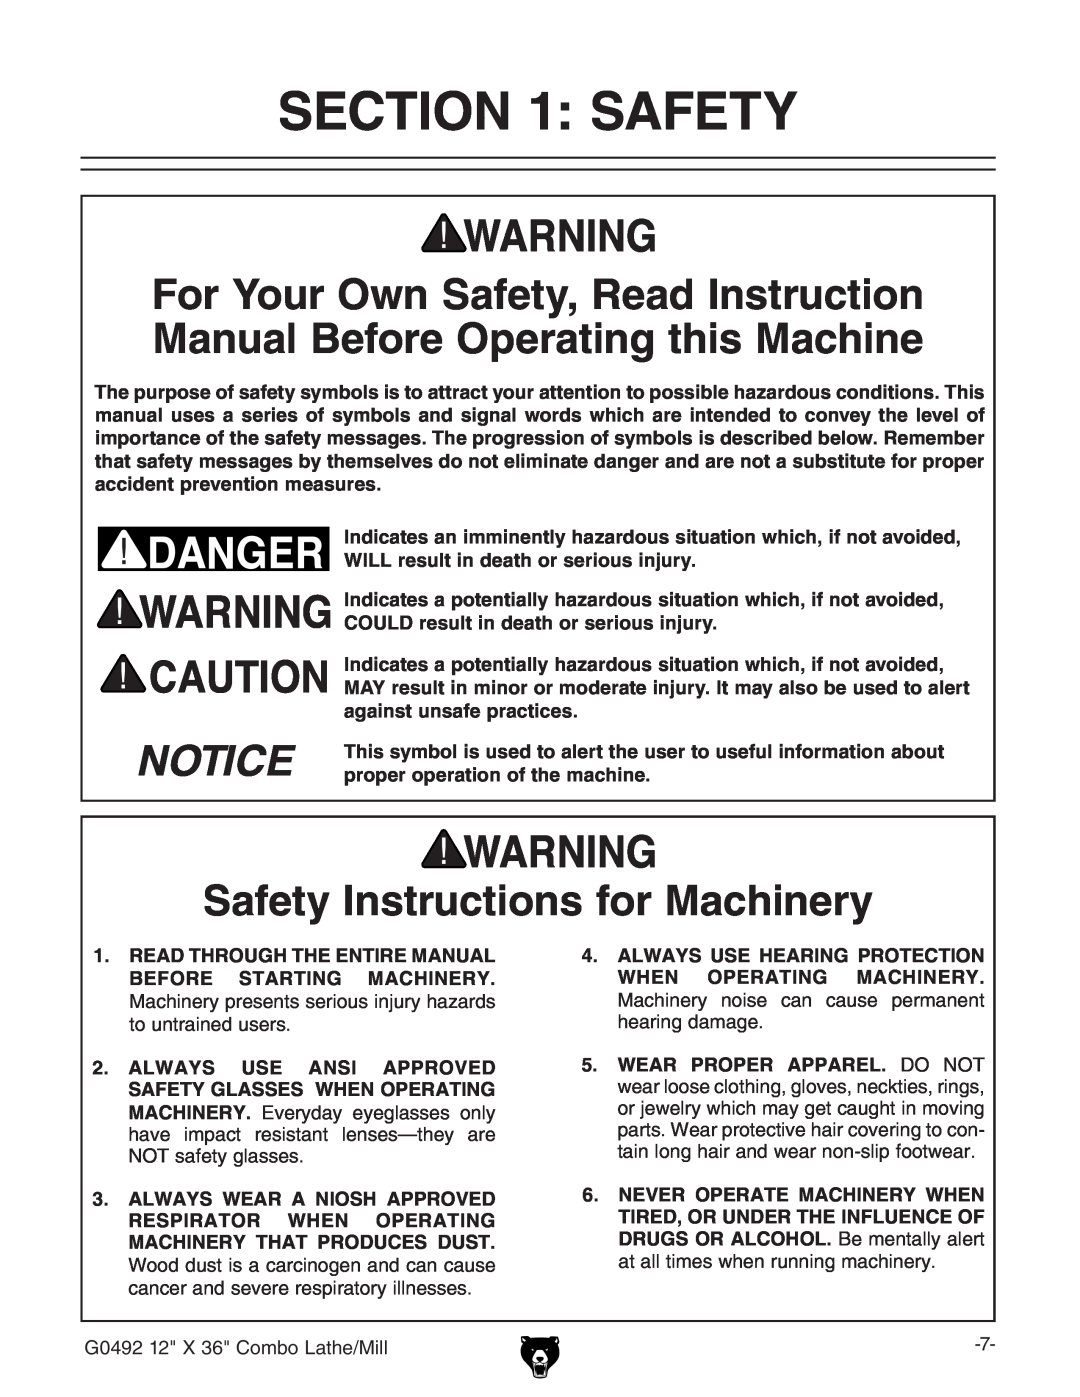 Grizzly G0492 manual 3%#4/. 3!&%49, 3AFETYYNSTRUCTIONS FOR -ACHINERY, 7,,,RESULT IN DEATH ORRSERIOUSOINJURY 